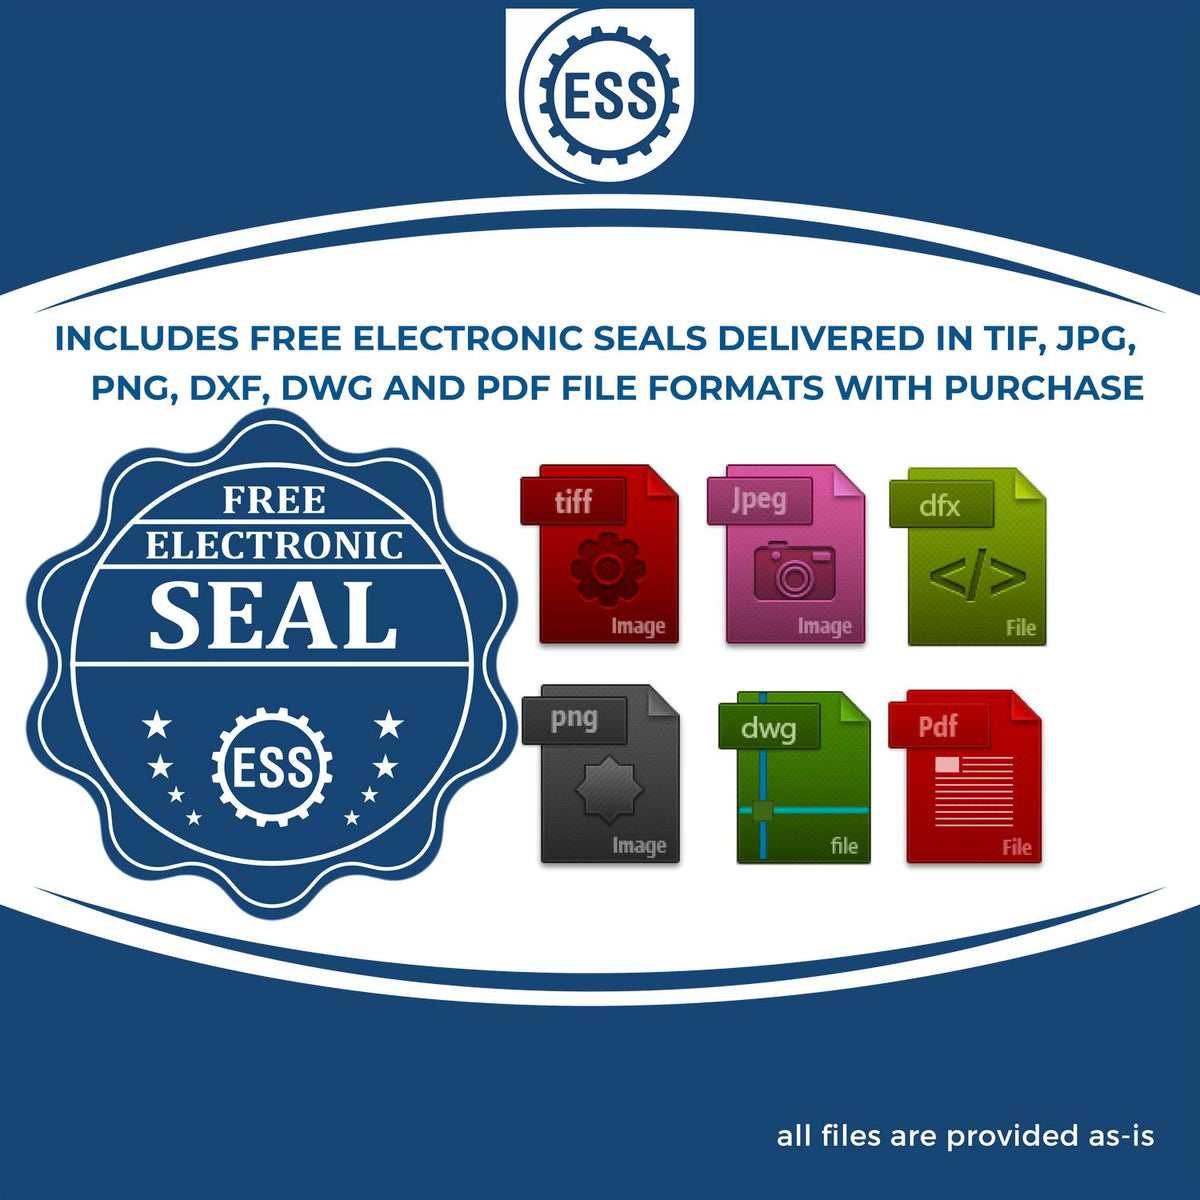 An infographic for the free electronic seal for the Heavy-Duty Alaska Rectangular Notary Stamp illustrating the different file type icons such as DXF, DWG, TIF, JPG and PNG.